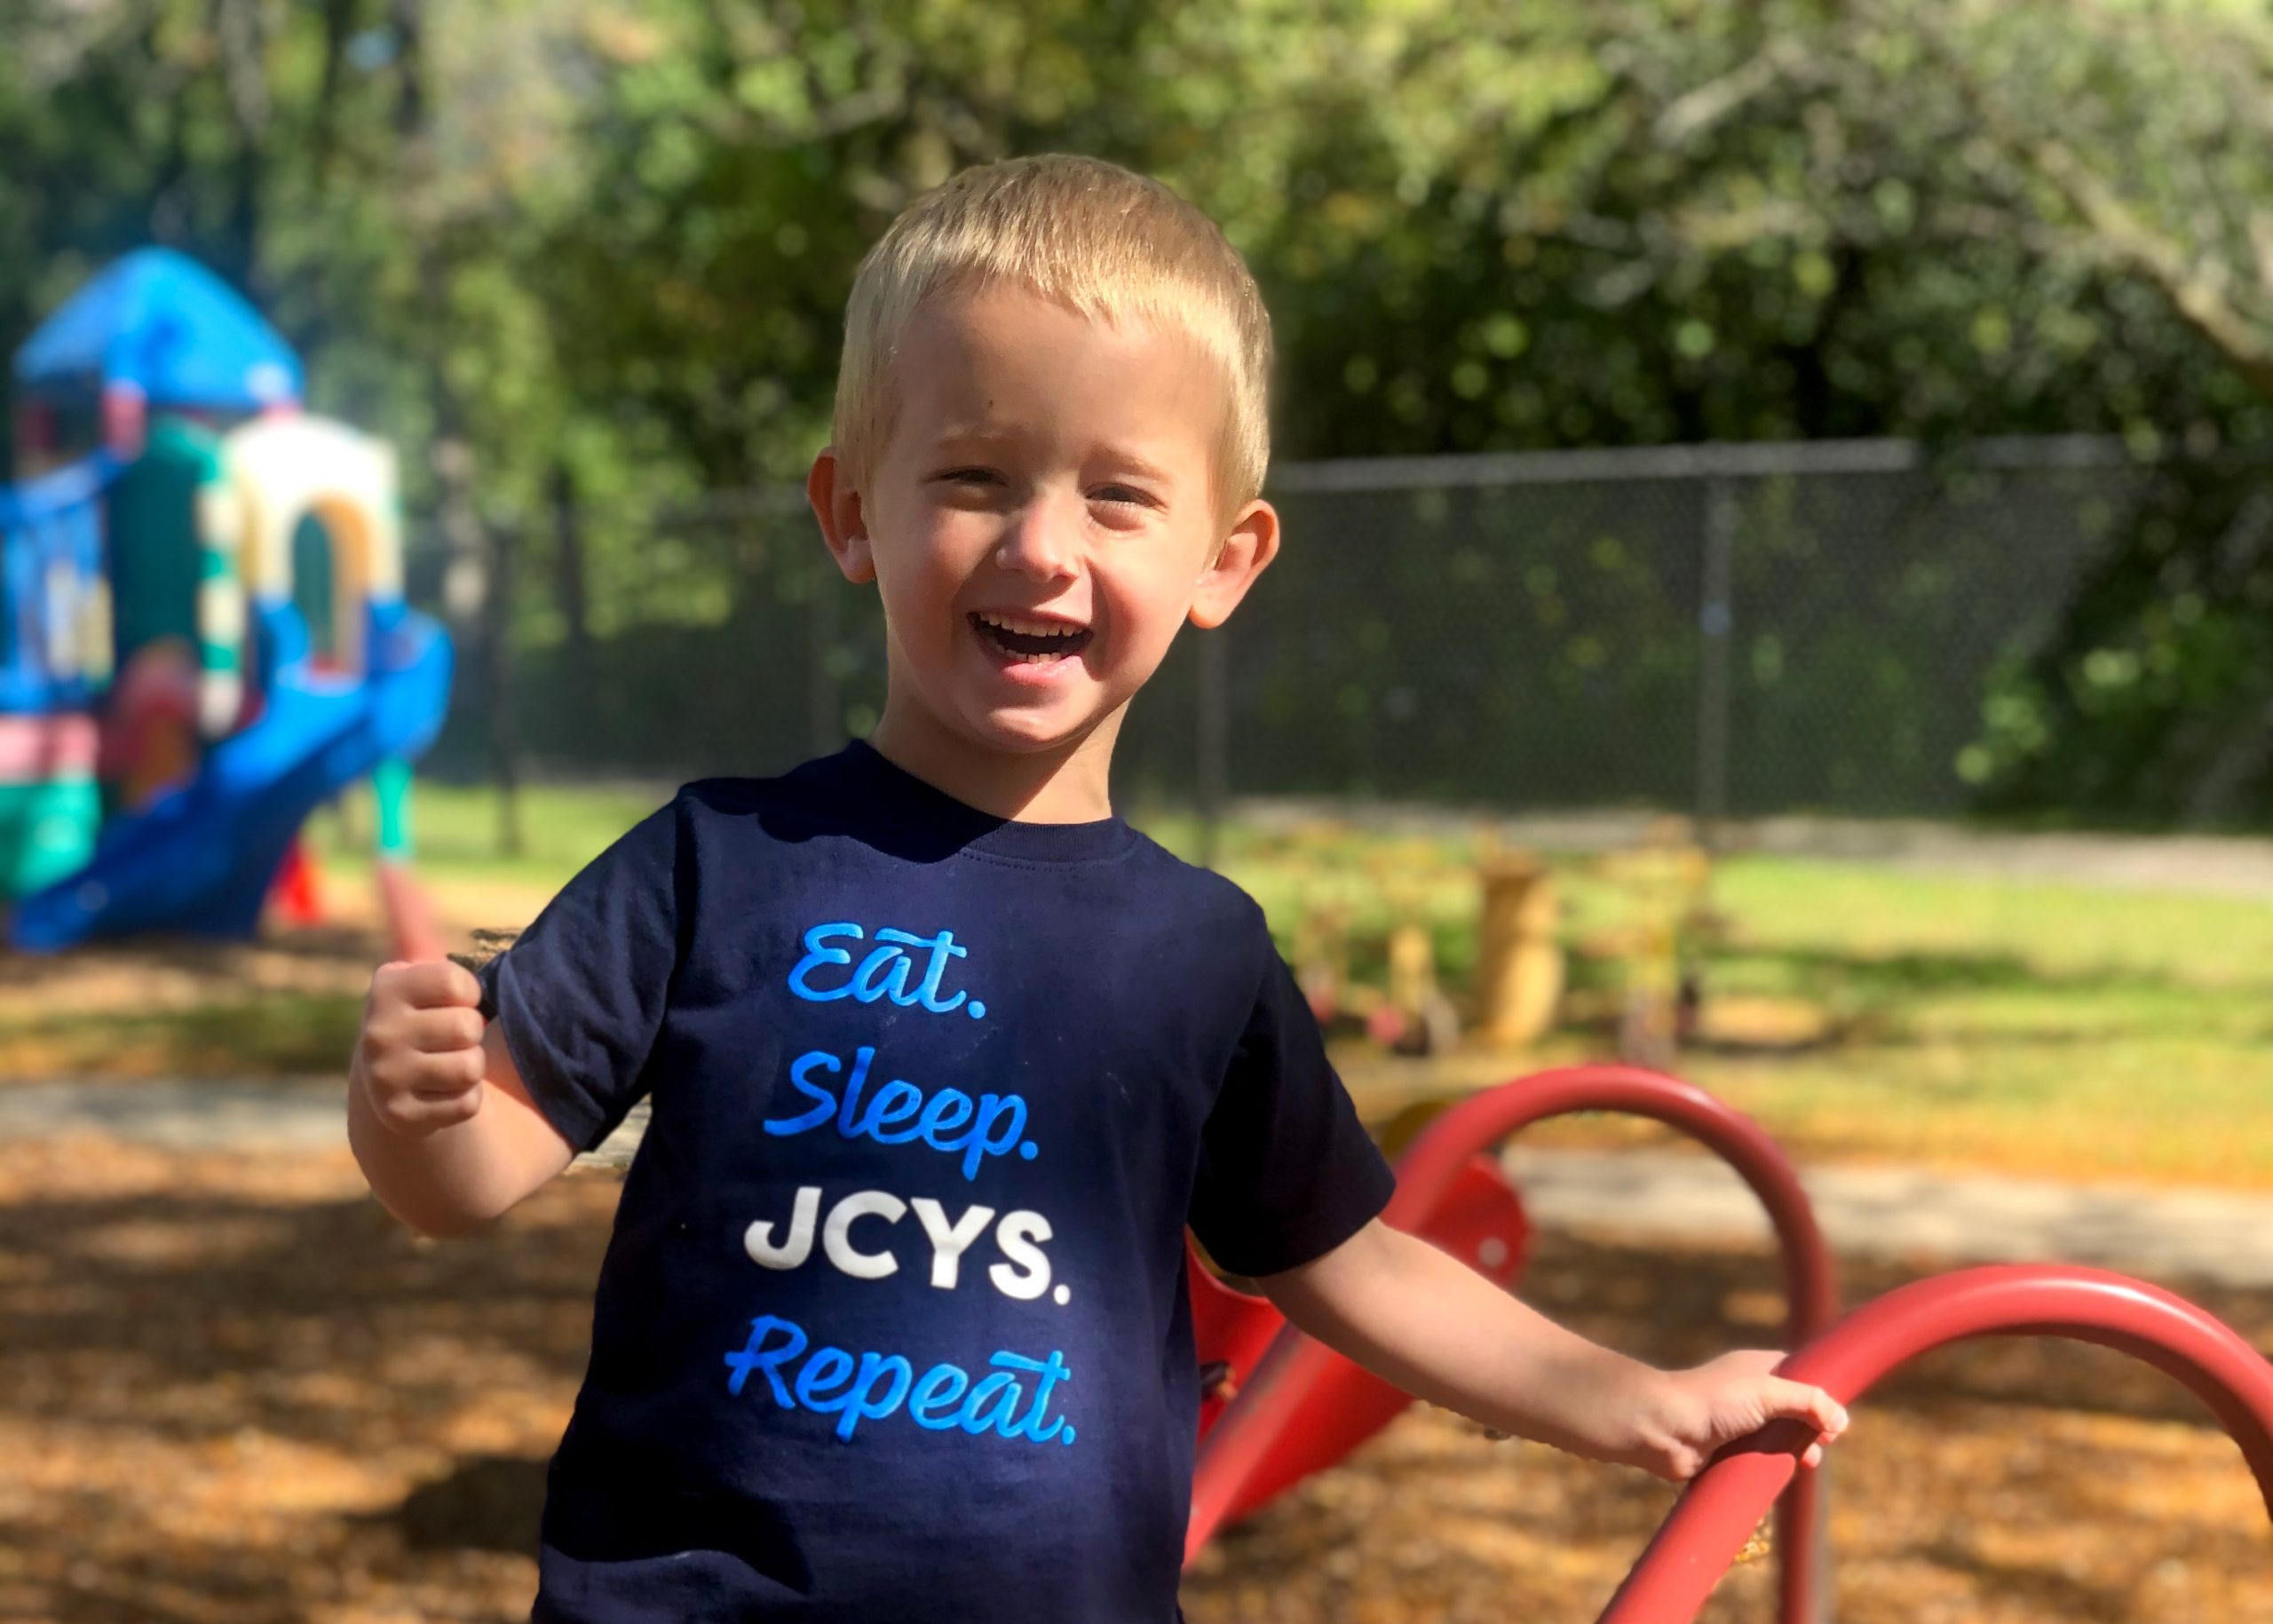 Boy outside giving thumbs up and wearing Eat. Sleep. JCYS. Repeat. shirt